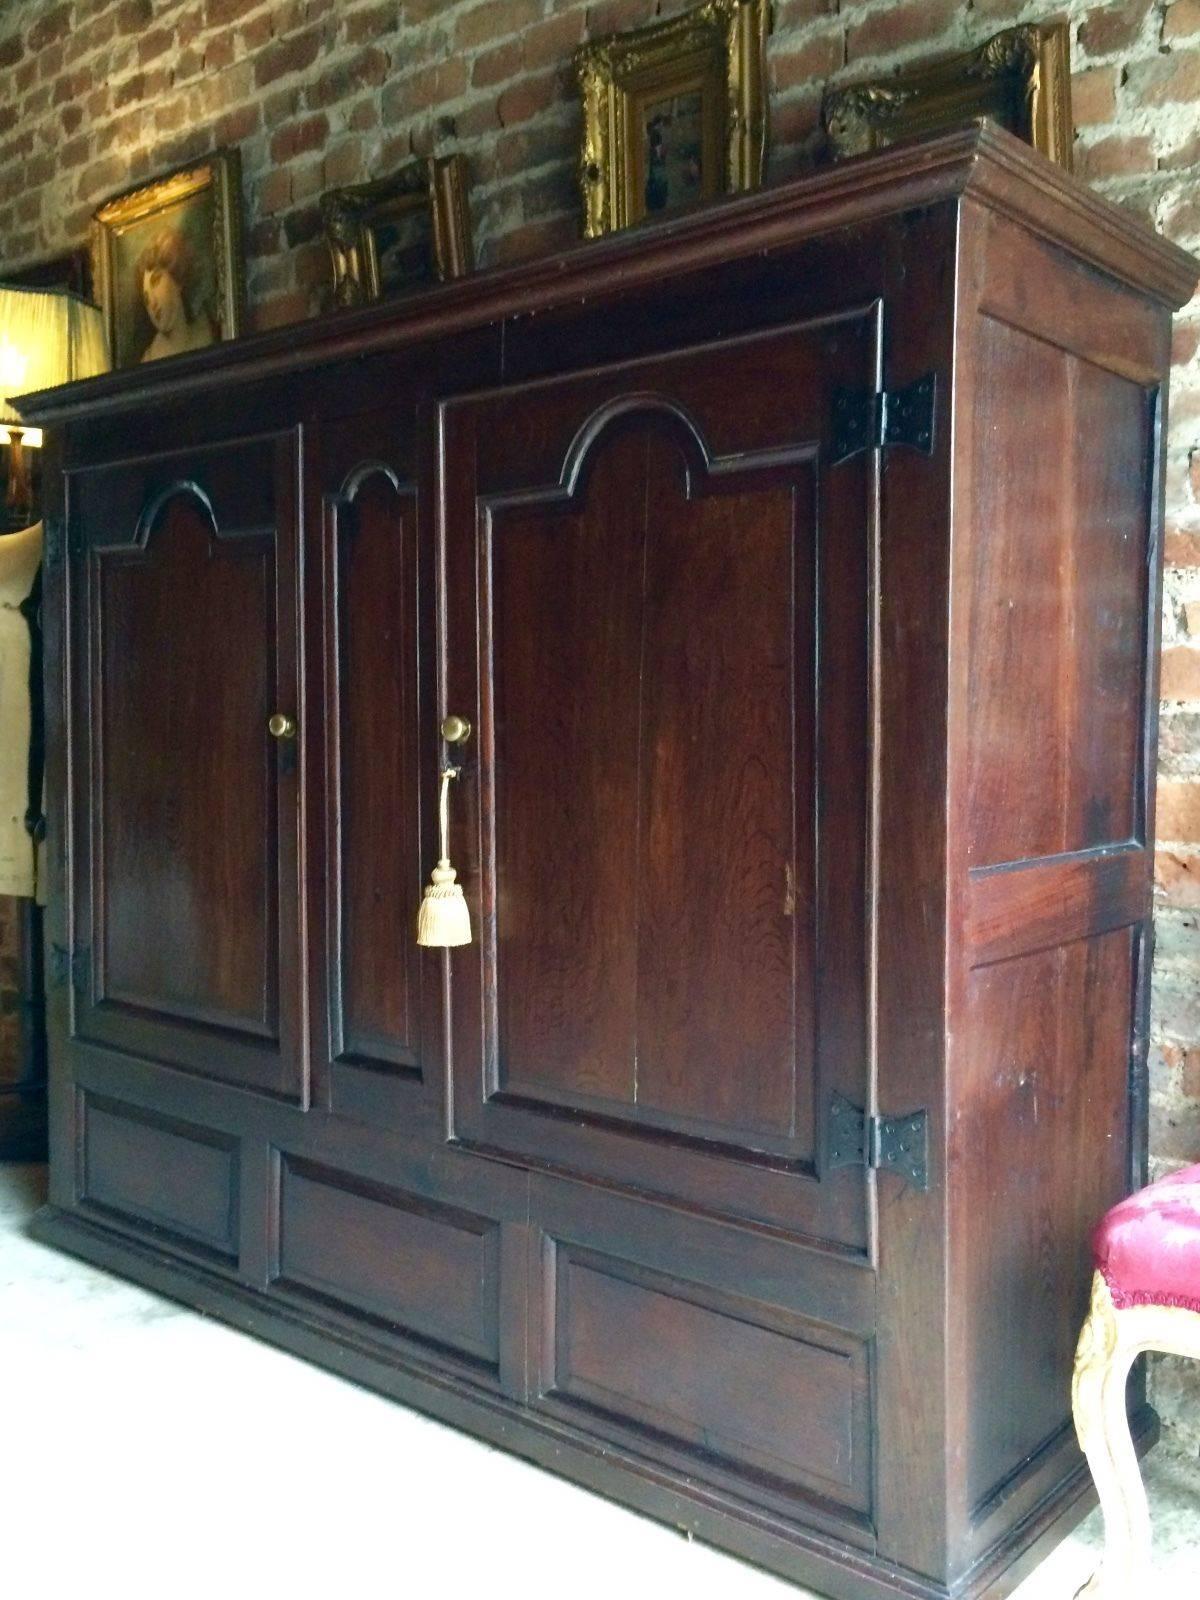 Antique 18th century solid oak two door livery cupboard wardrobe, corniced top over a pair of twin fielded arch topped panelled doors with exposed hinges, comes with one non working key and tassel, the interior is a blank space to either add shelves